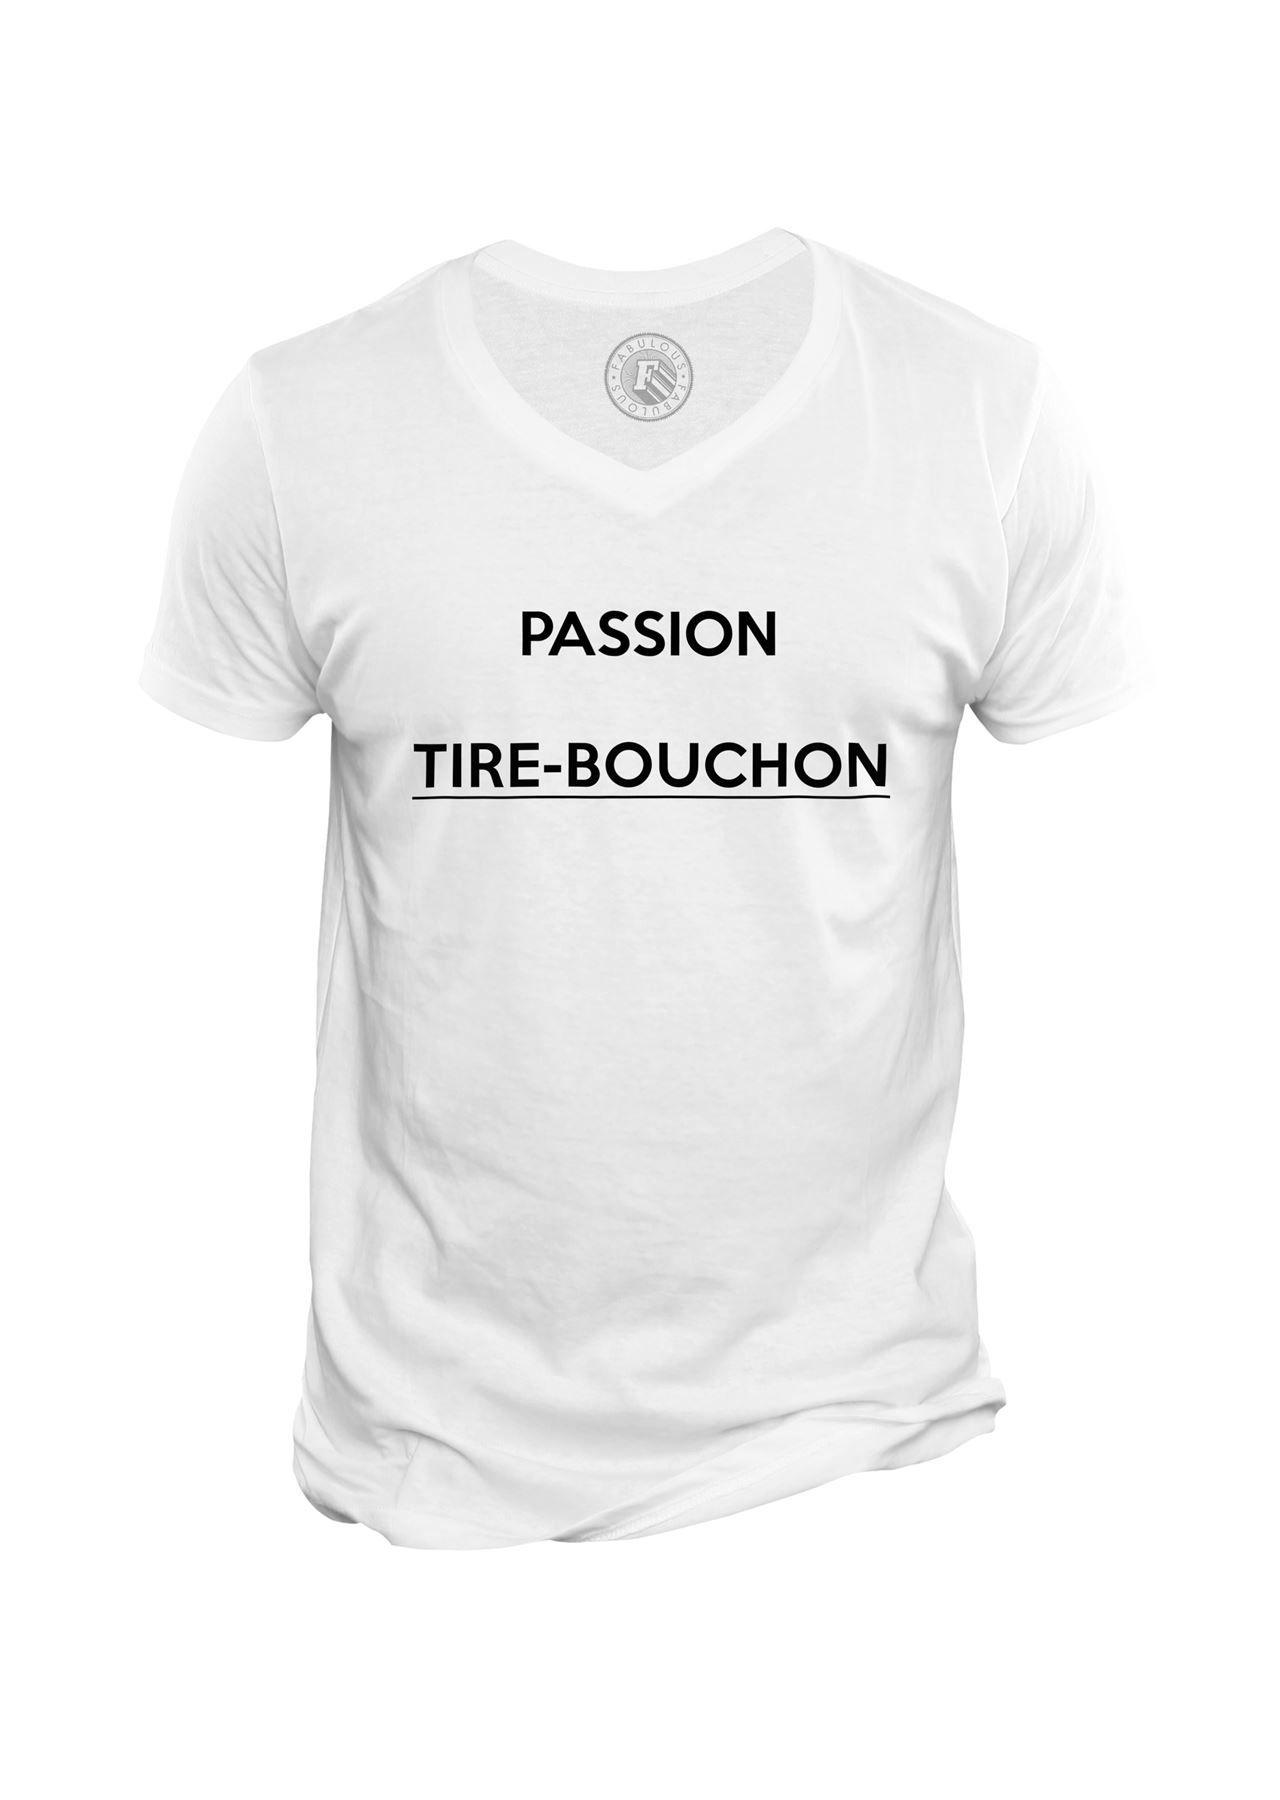 T-shirt Homme Col V Passion Tire Bouchon Humour Drole Alcool